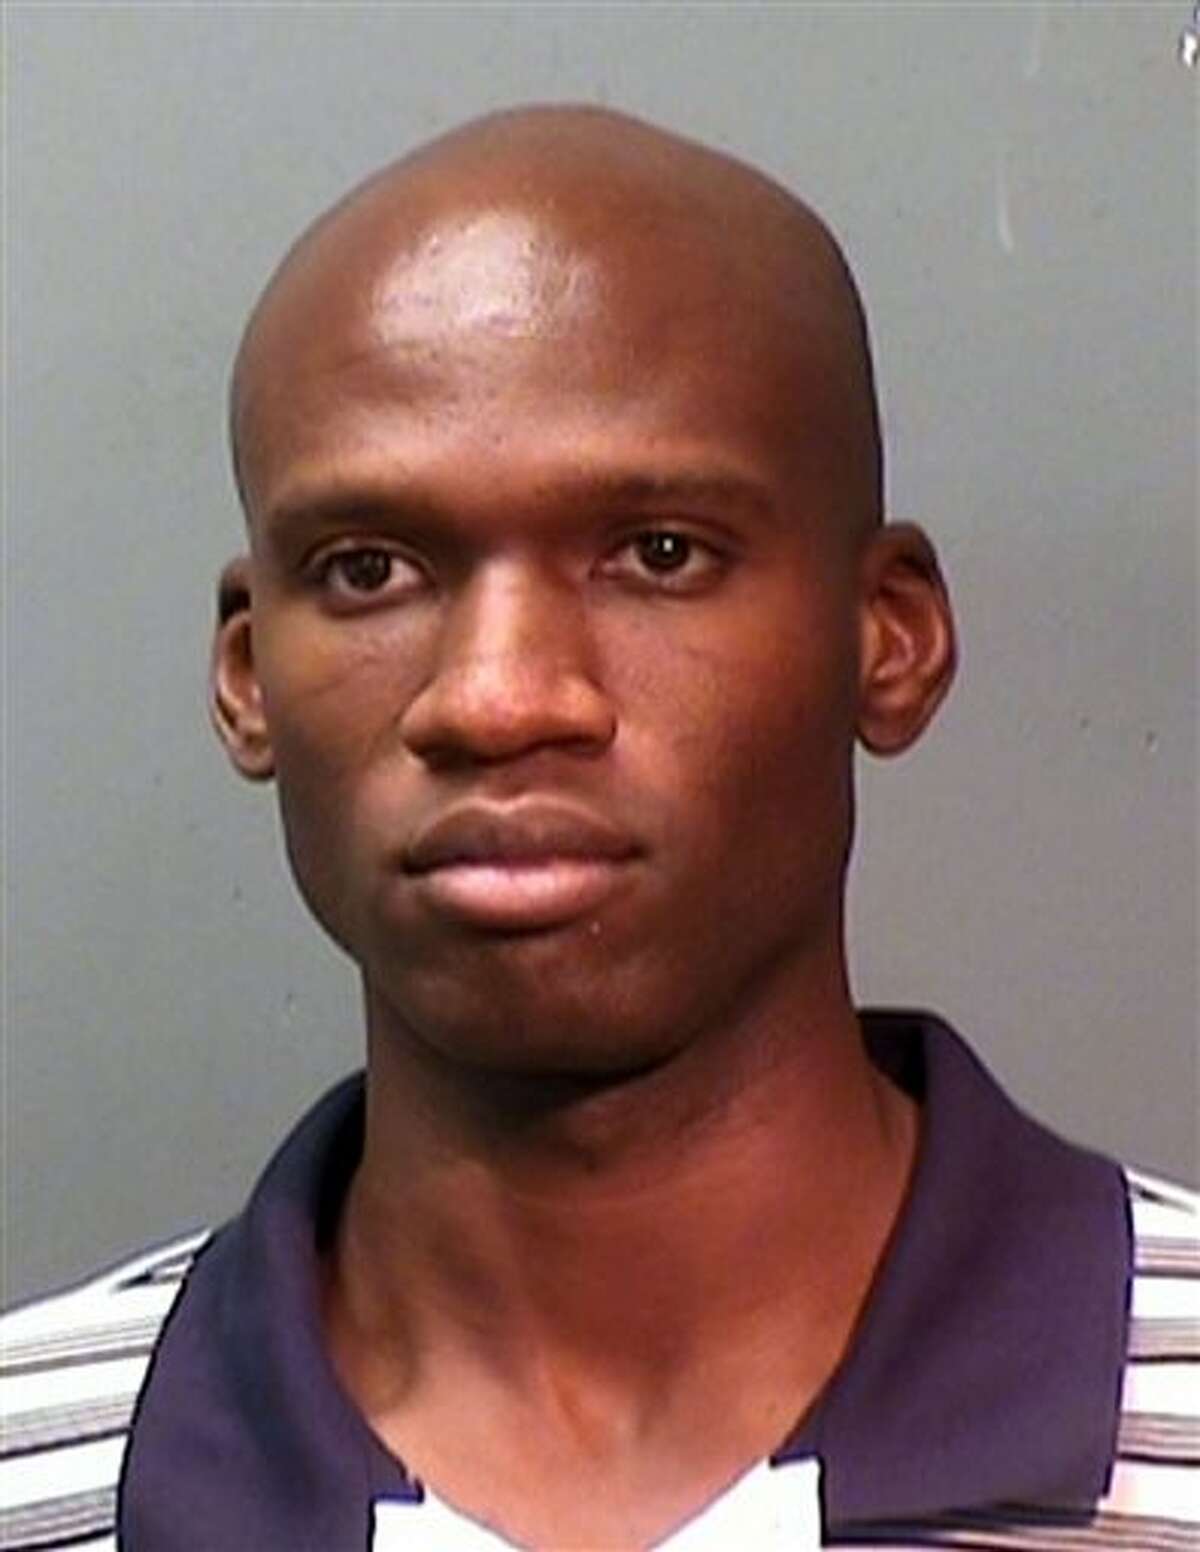 This booking photo provided by the Fort Worth Police Department shows Aaron Alexis, arrested in September, 2010, on suspicion of discharging a firearm in the city limits. The FBI has identified Alexis, 34, as the gunman in the Monday, Sept. 16, 2013 shooting rampage at at the Washington Navy Yard in Washington that left thirteen dead, including himself. (AP Photo/ Fort Worth Police Department)